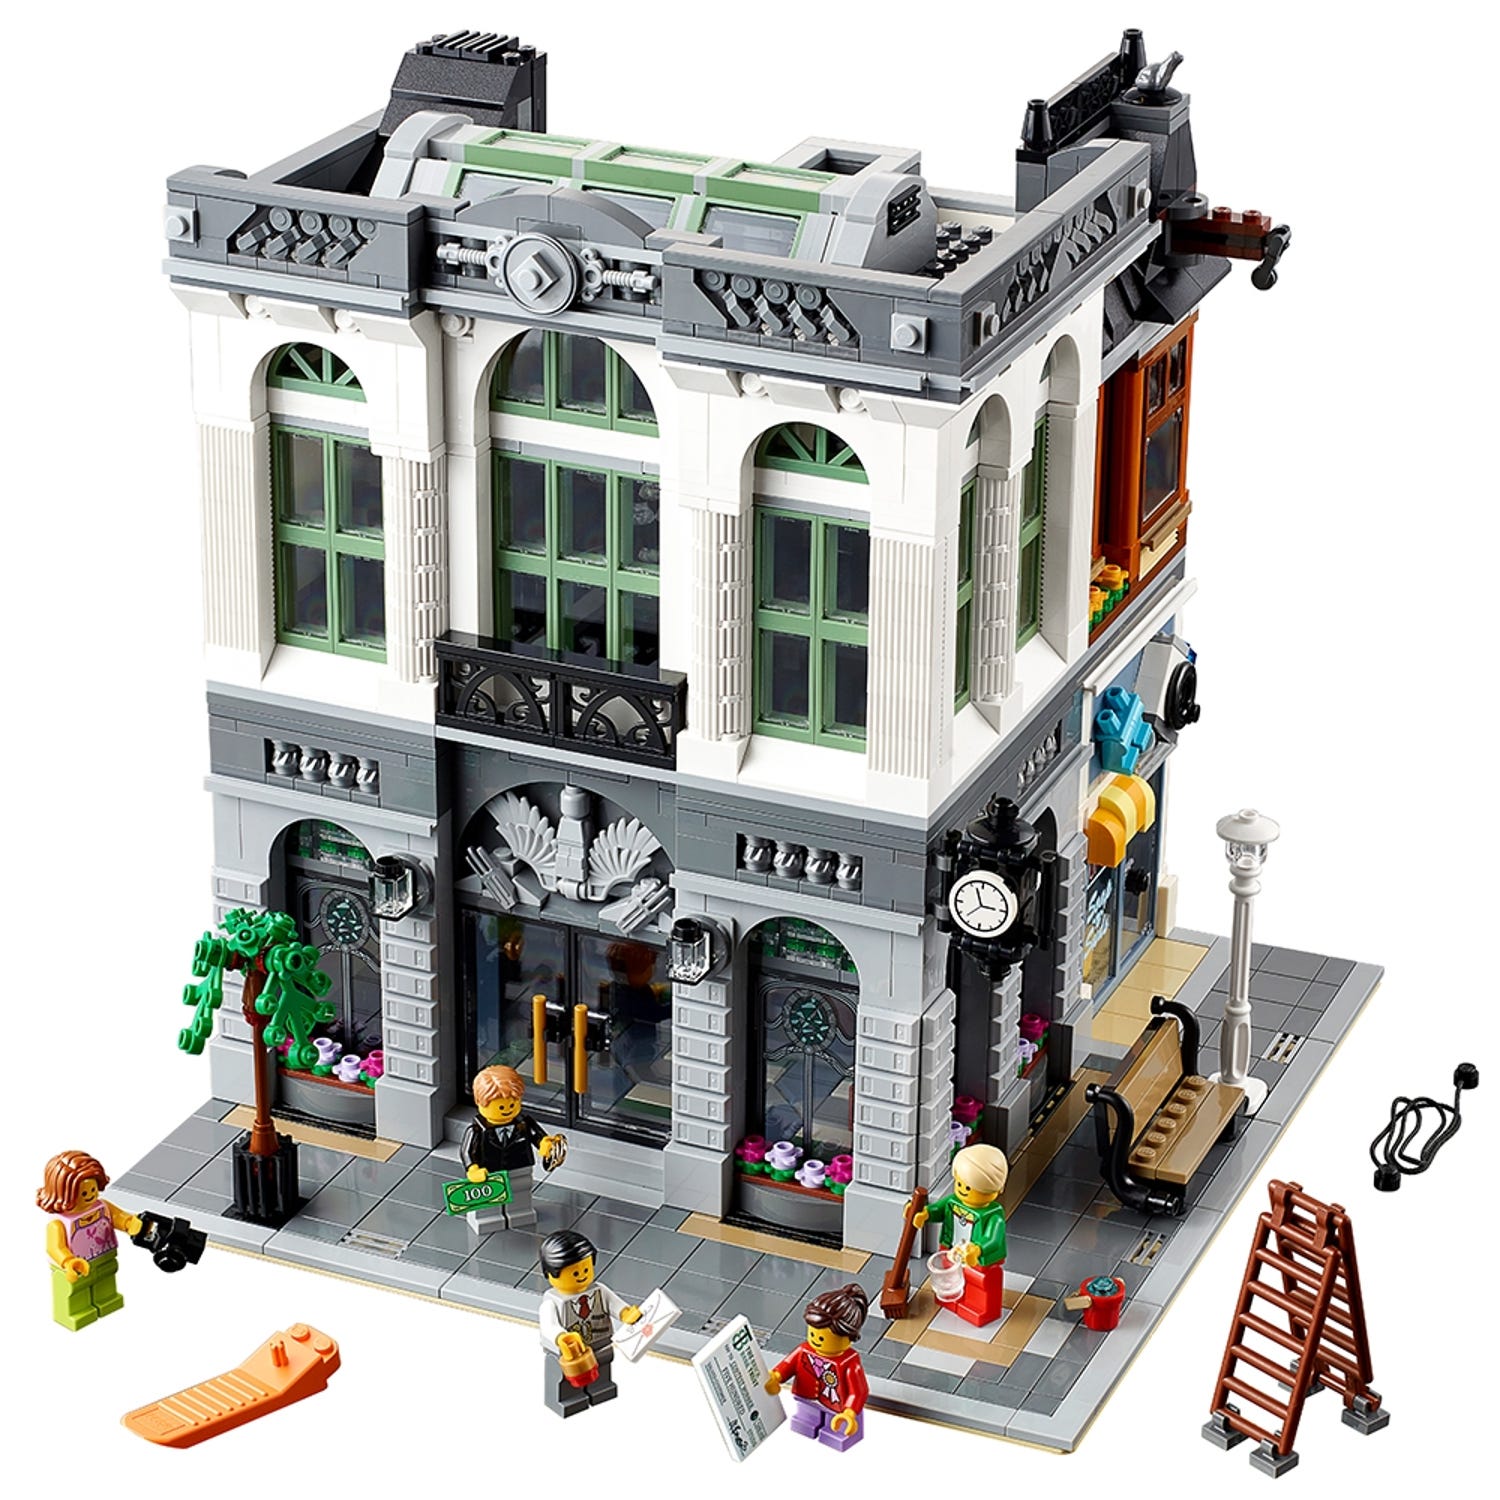 Bank 10251 | Creator Expert Buy at the Official LEGO® Shop US